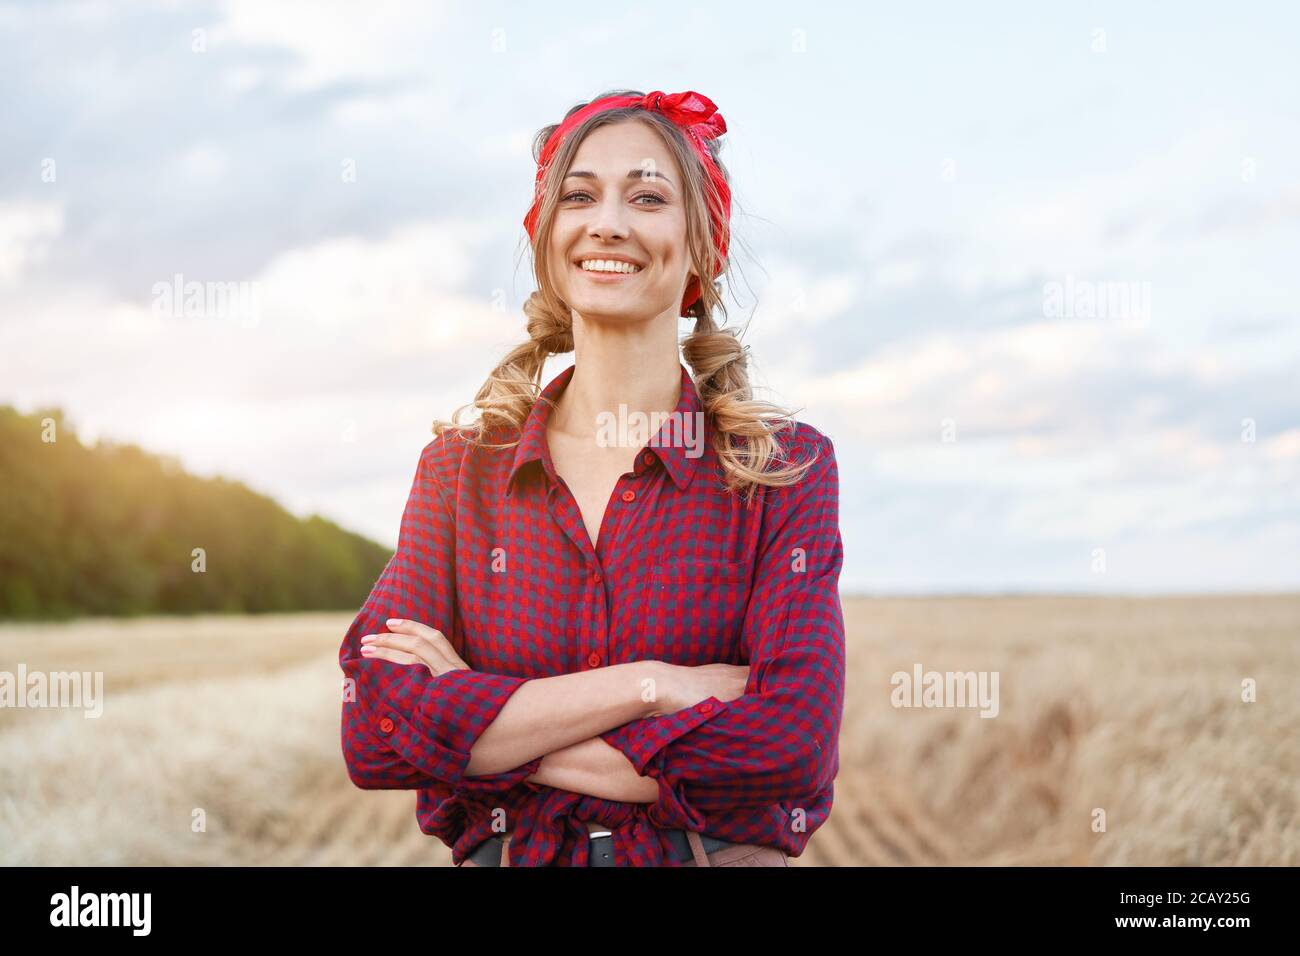 Woman farmer standing farmland smiling Female agronomist specialist farming agribusiness Happy positive caucasian worker agricultural field dressed re Stock Photo